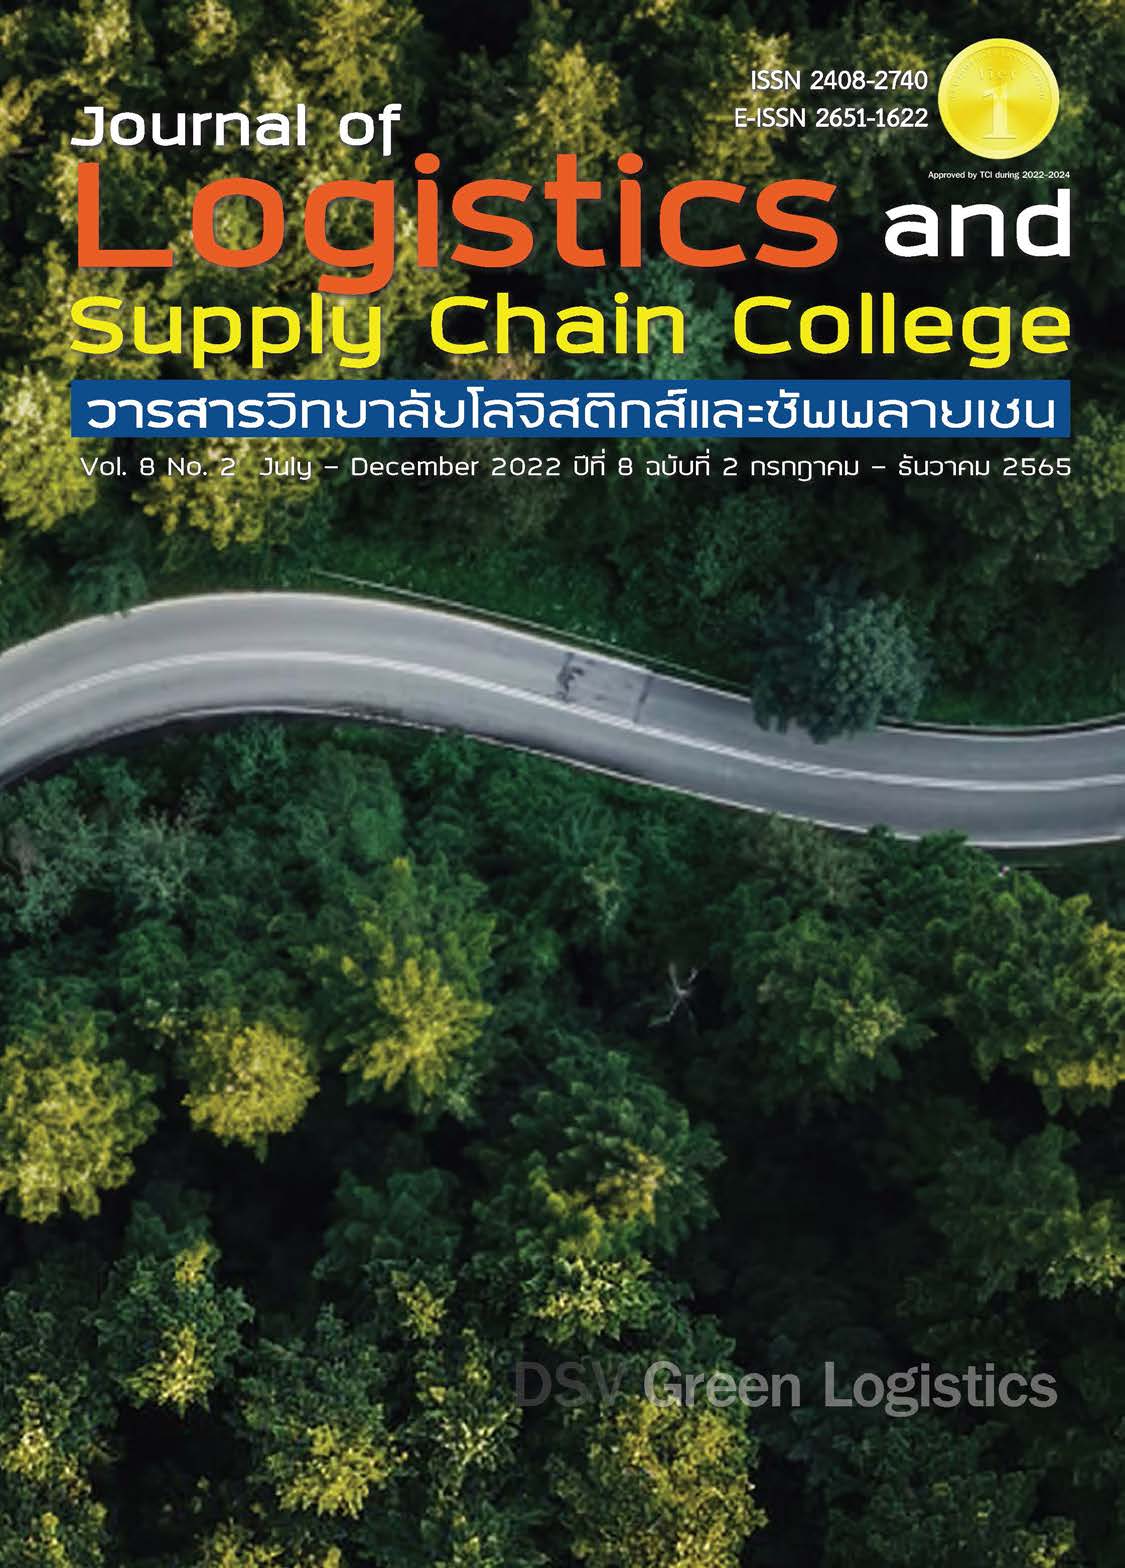 					View Vol. 8 No. 2 (2022): Journal of Logistics and Supply Chain College
				